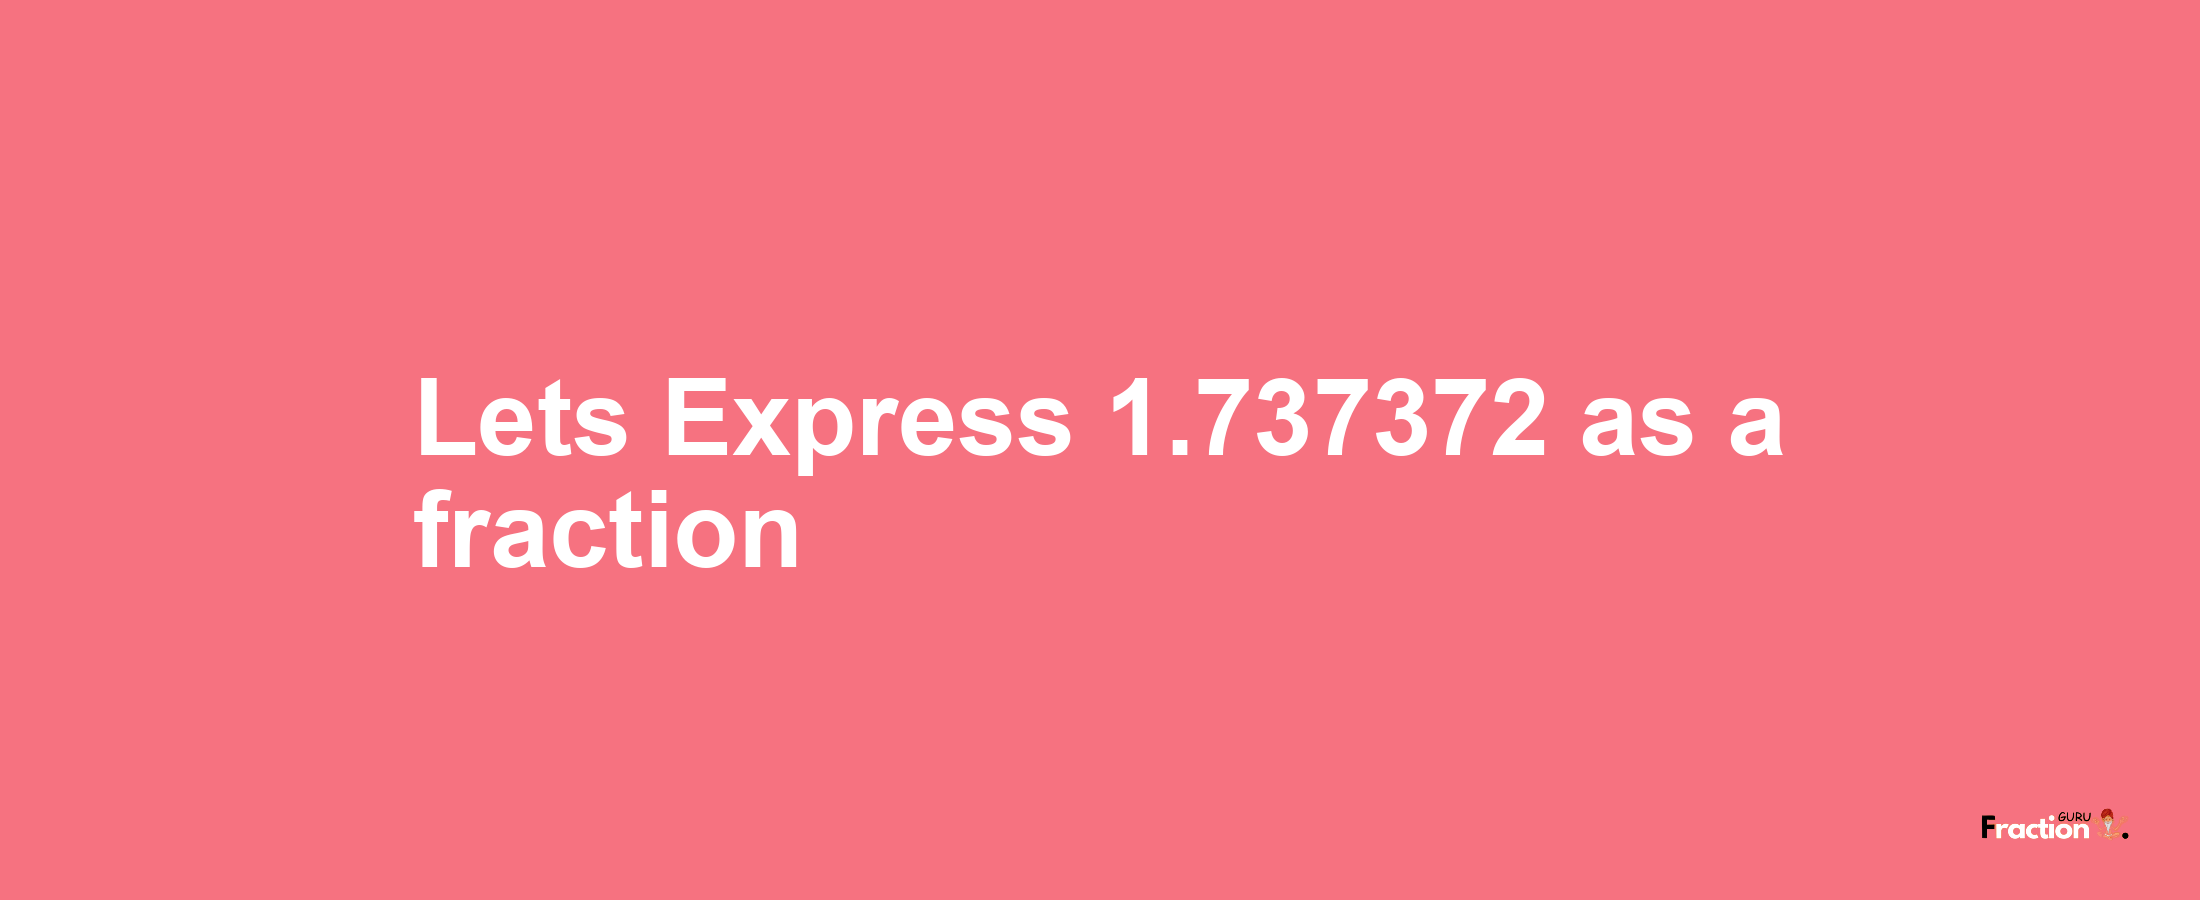 Lets Express 1.737372 as afraction